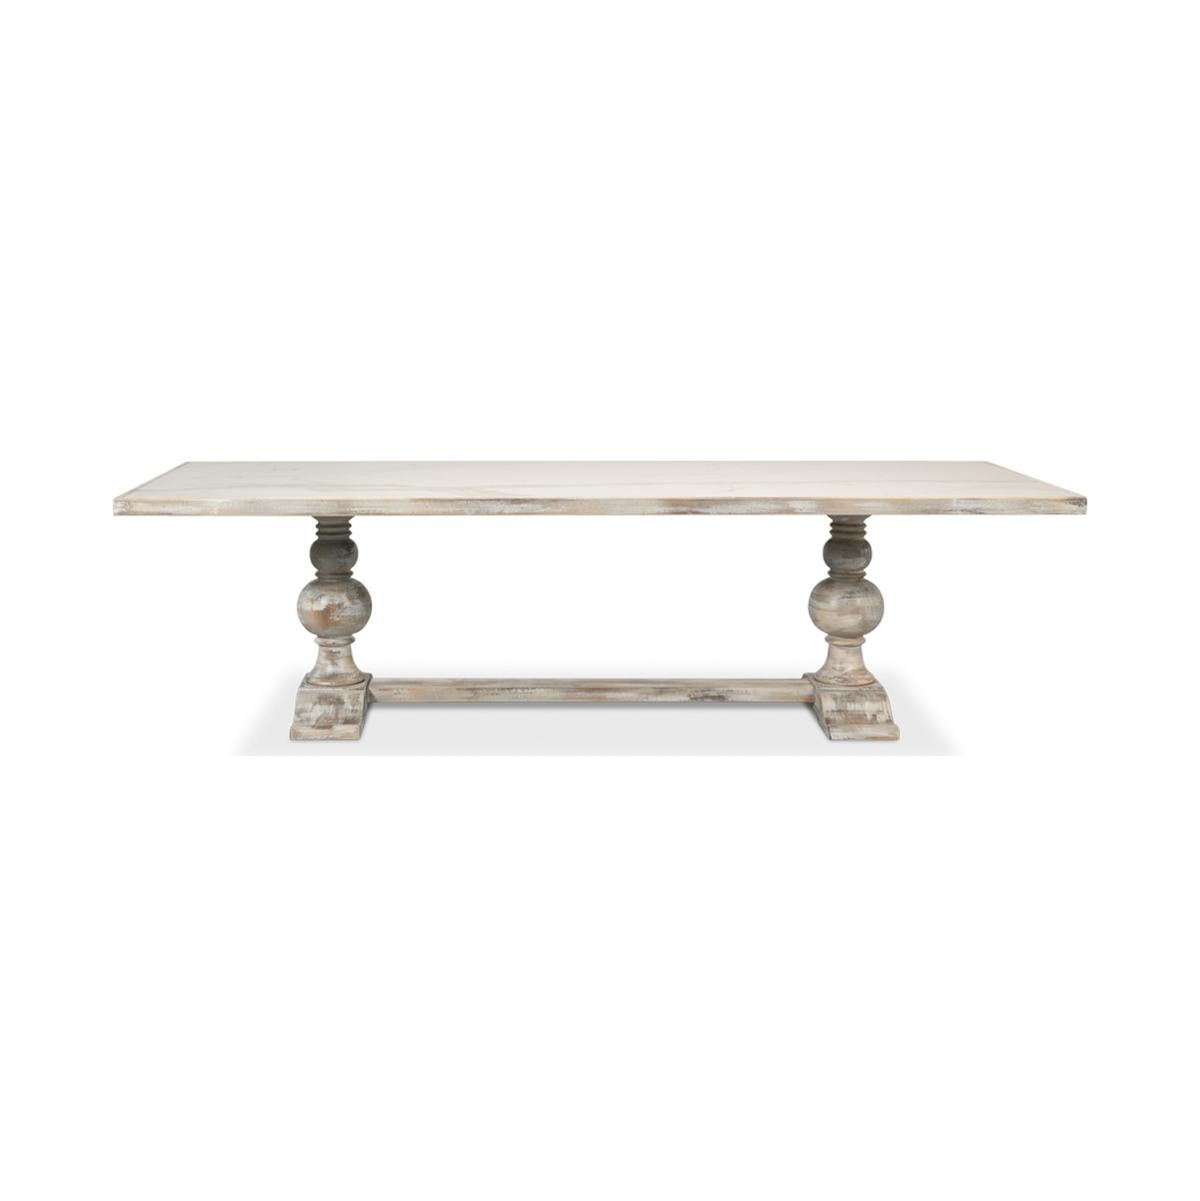 Dining Table with a Calacatta porcelain inlaid top, on a turned baluster form double pedestal base with a hand rubbed and antiqued grey painted finish.

Dimensions: 108